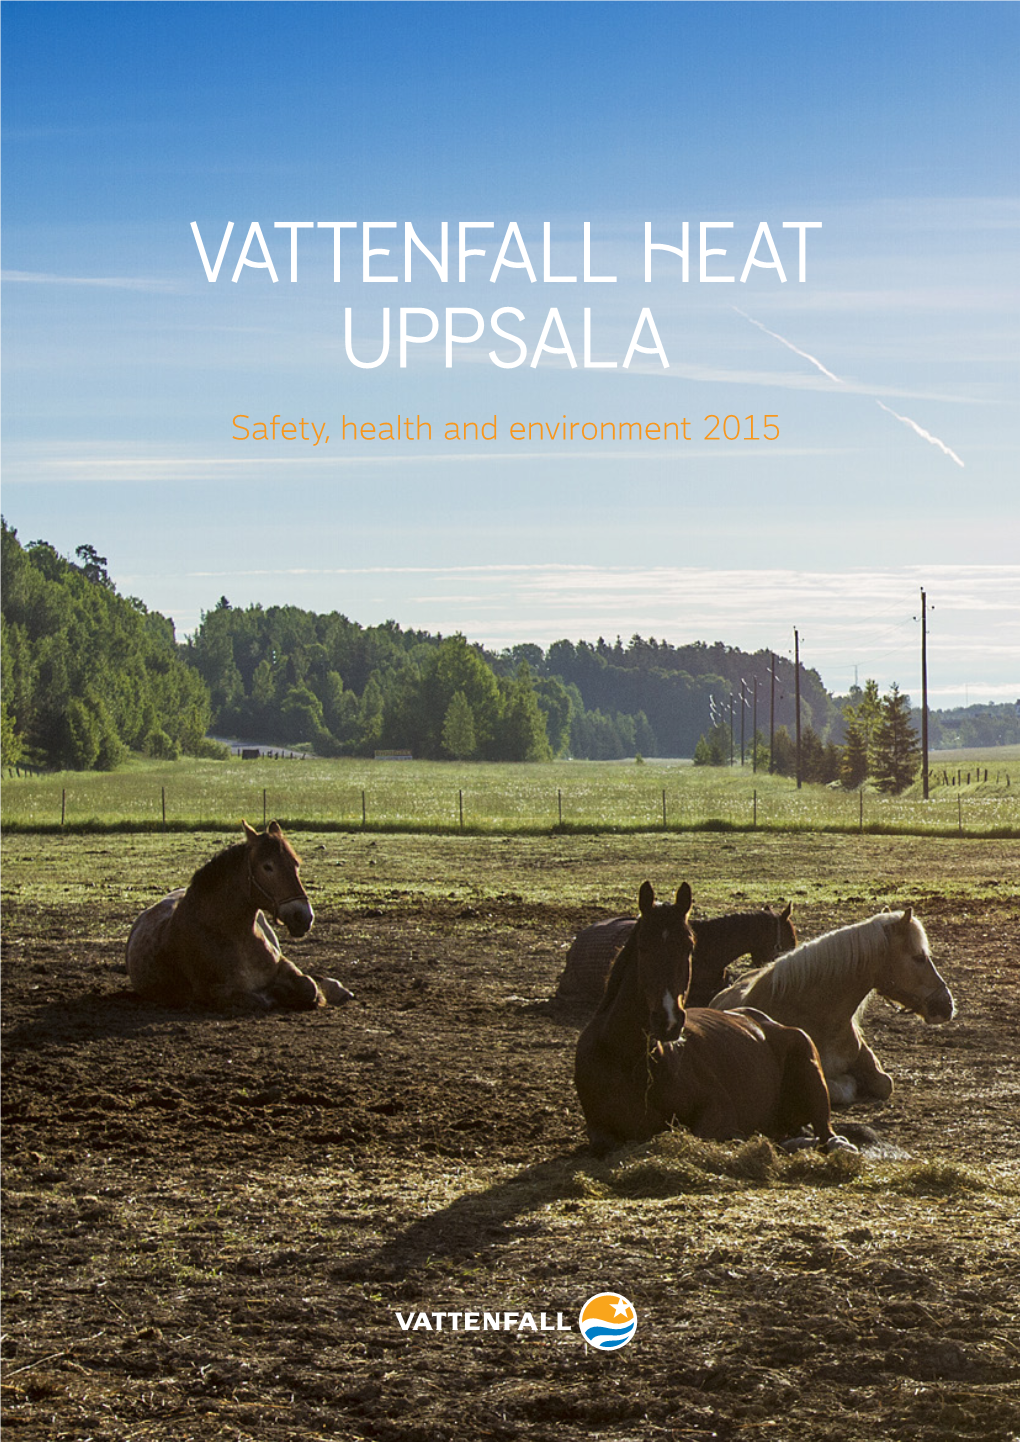 Vattenfall Heat Uppsala Safety, Health and Environment 2015 Your Local Content Vattenfall Heat Uppsala Heats the City of Preface 3 Uppsala with District Heating